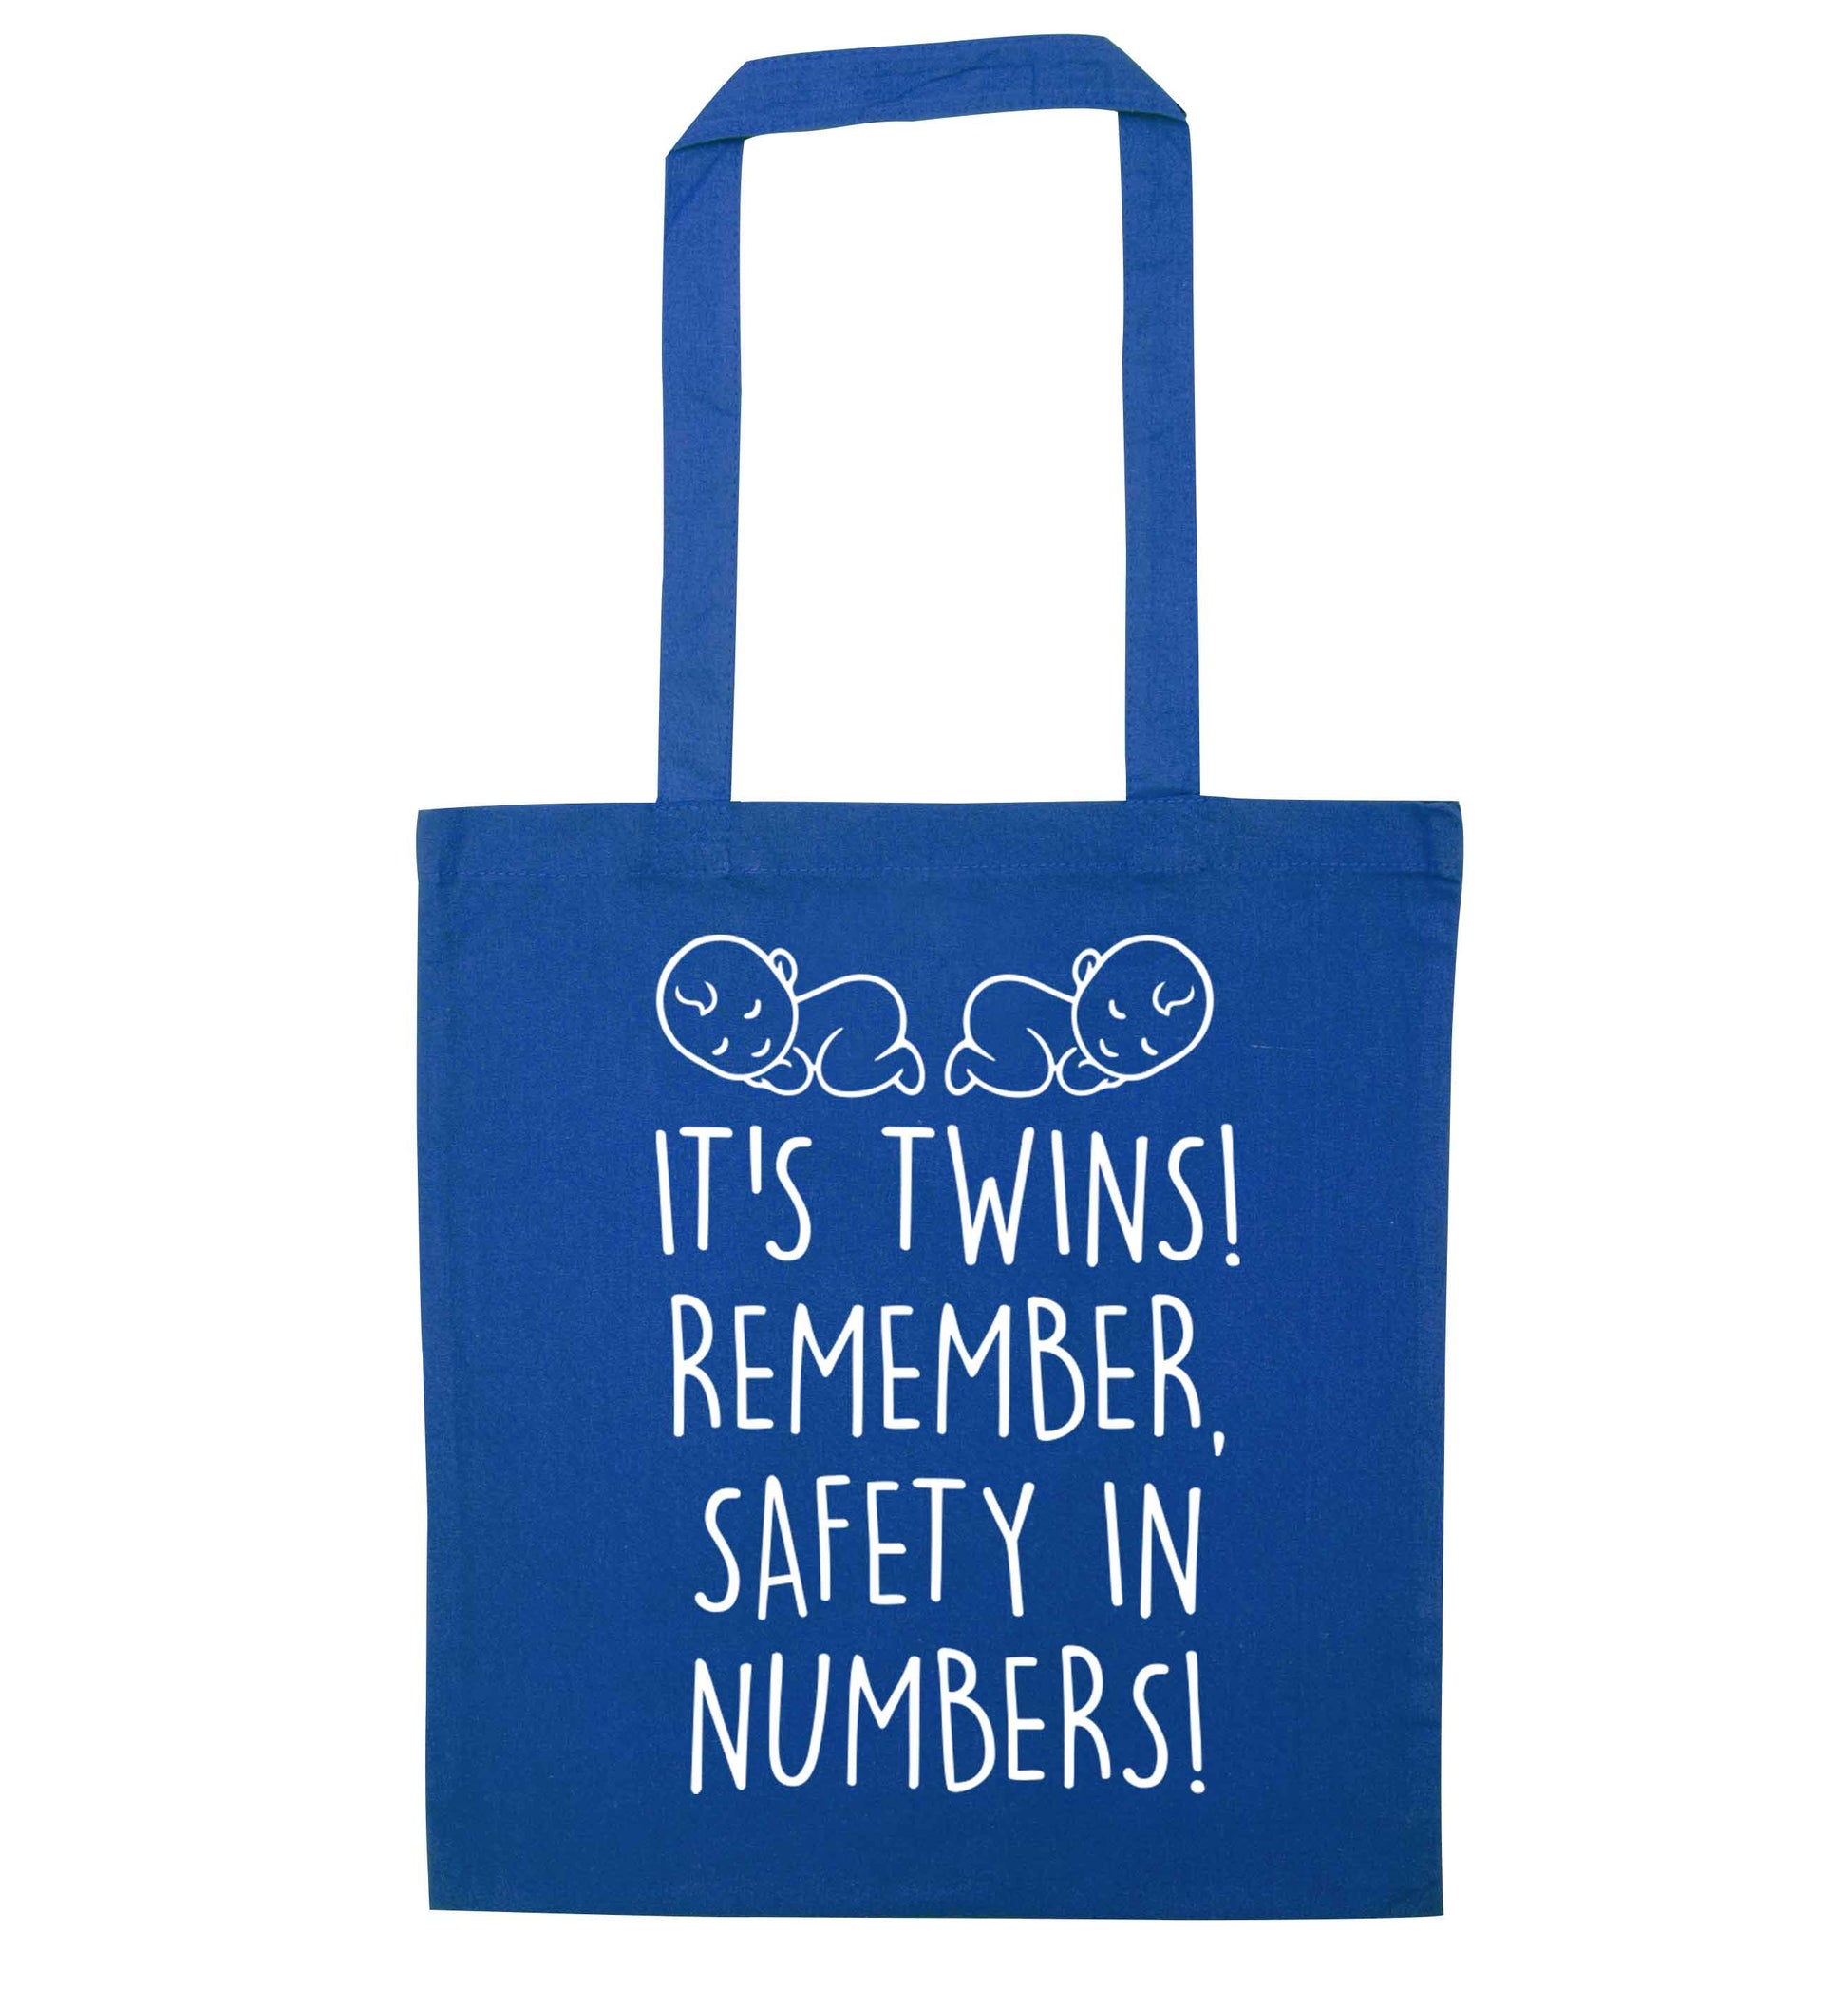 It's twins! Remember safety in numbers! blue tote bag